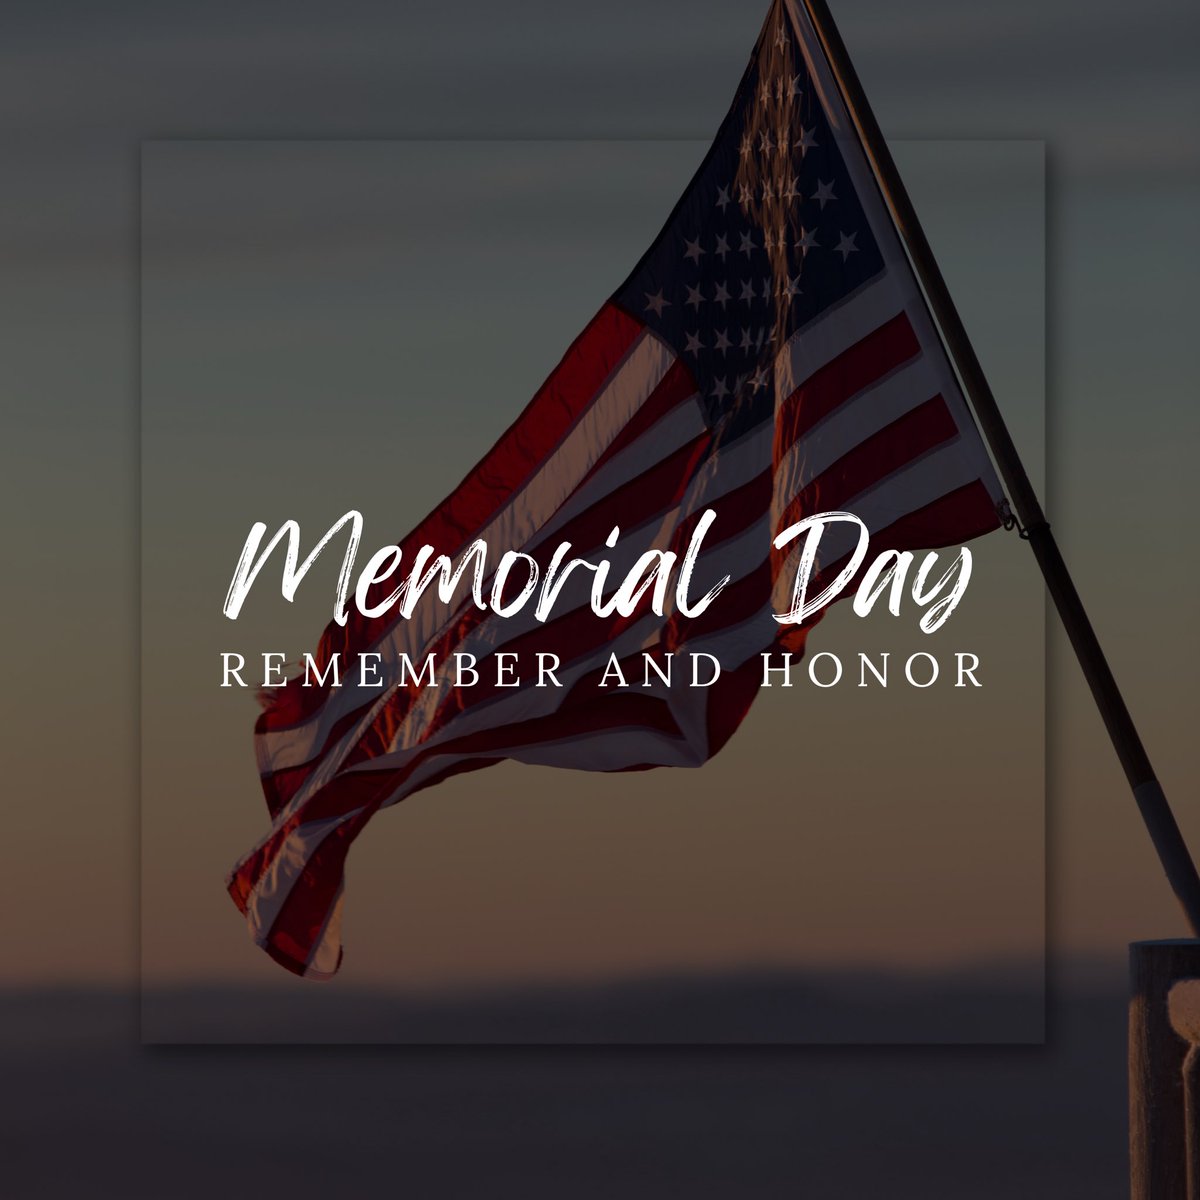 Memorial Day reminds us of the courageous individuals who have laid down their lives for our nation.

Today, we honor their memory and reflect on the values they defended. Wishing everyone a meaningful Memorial Day. 🇺🇸 

#MemorialDay #ServiceAndSacrifice #Respect #OsbornDrugs